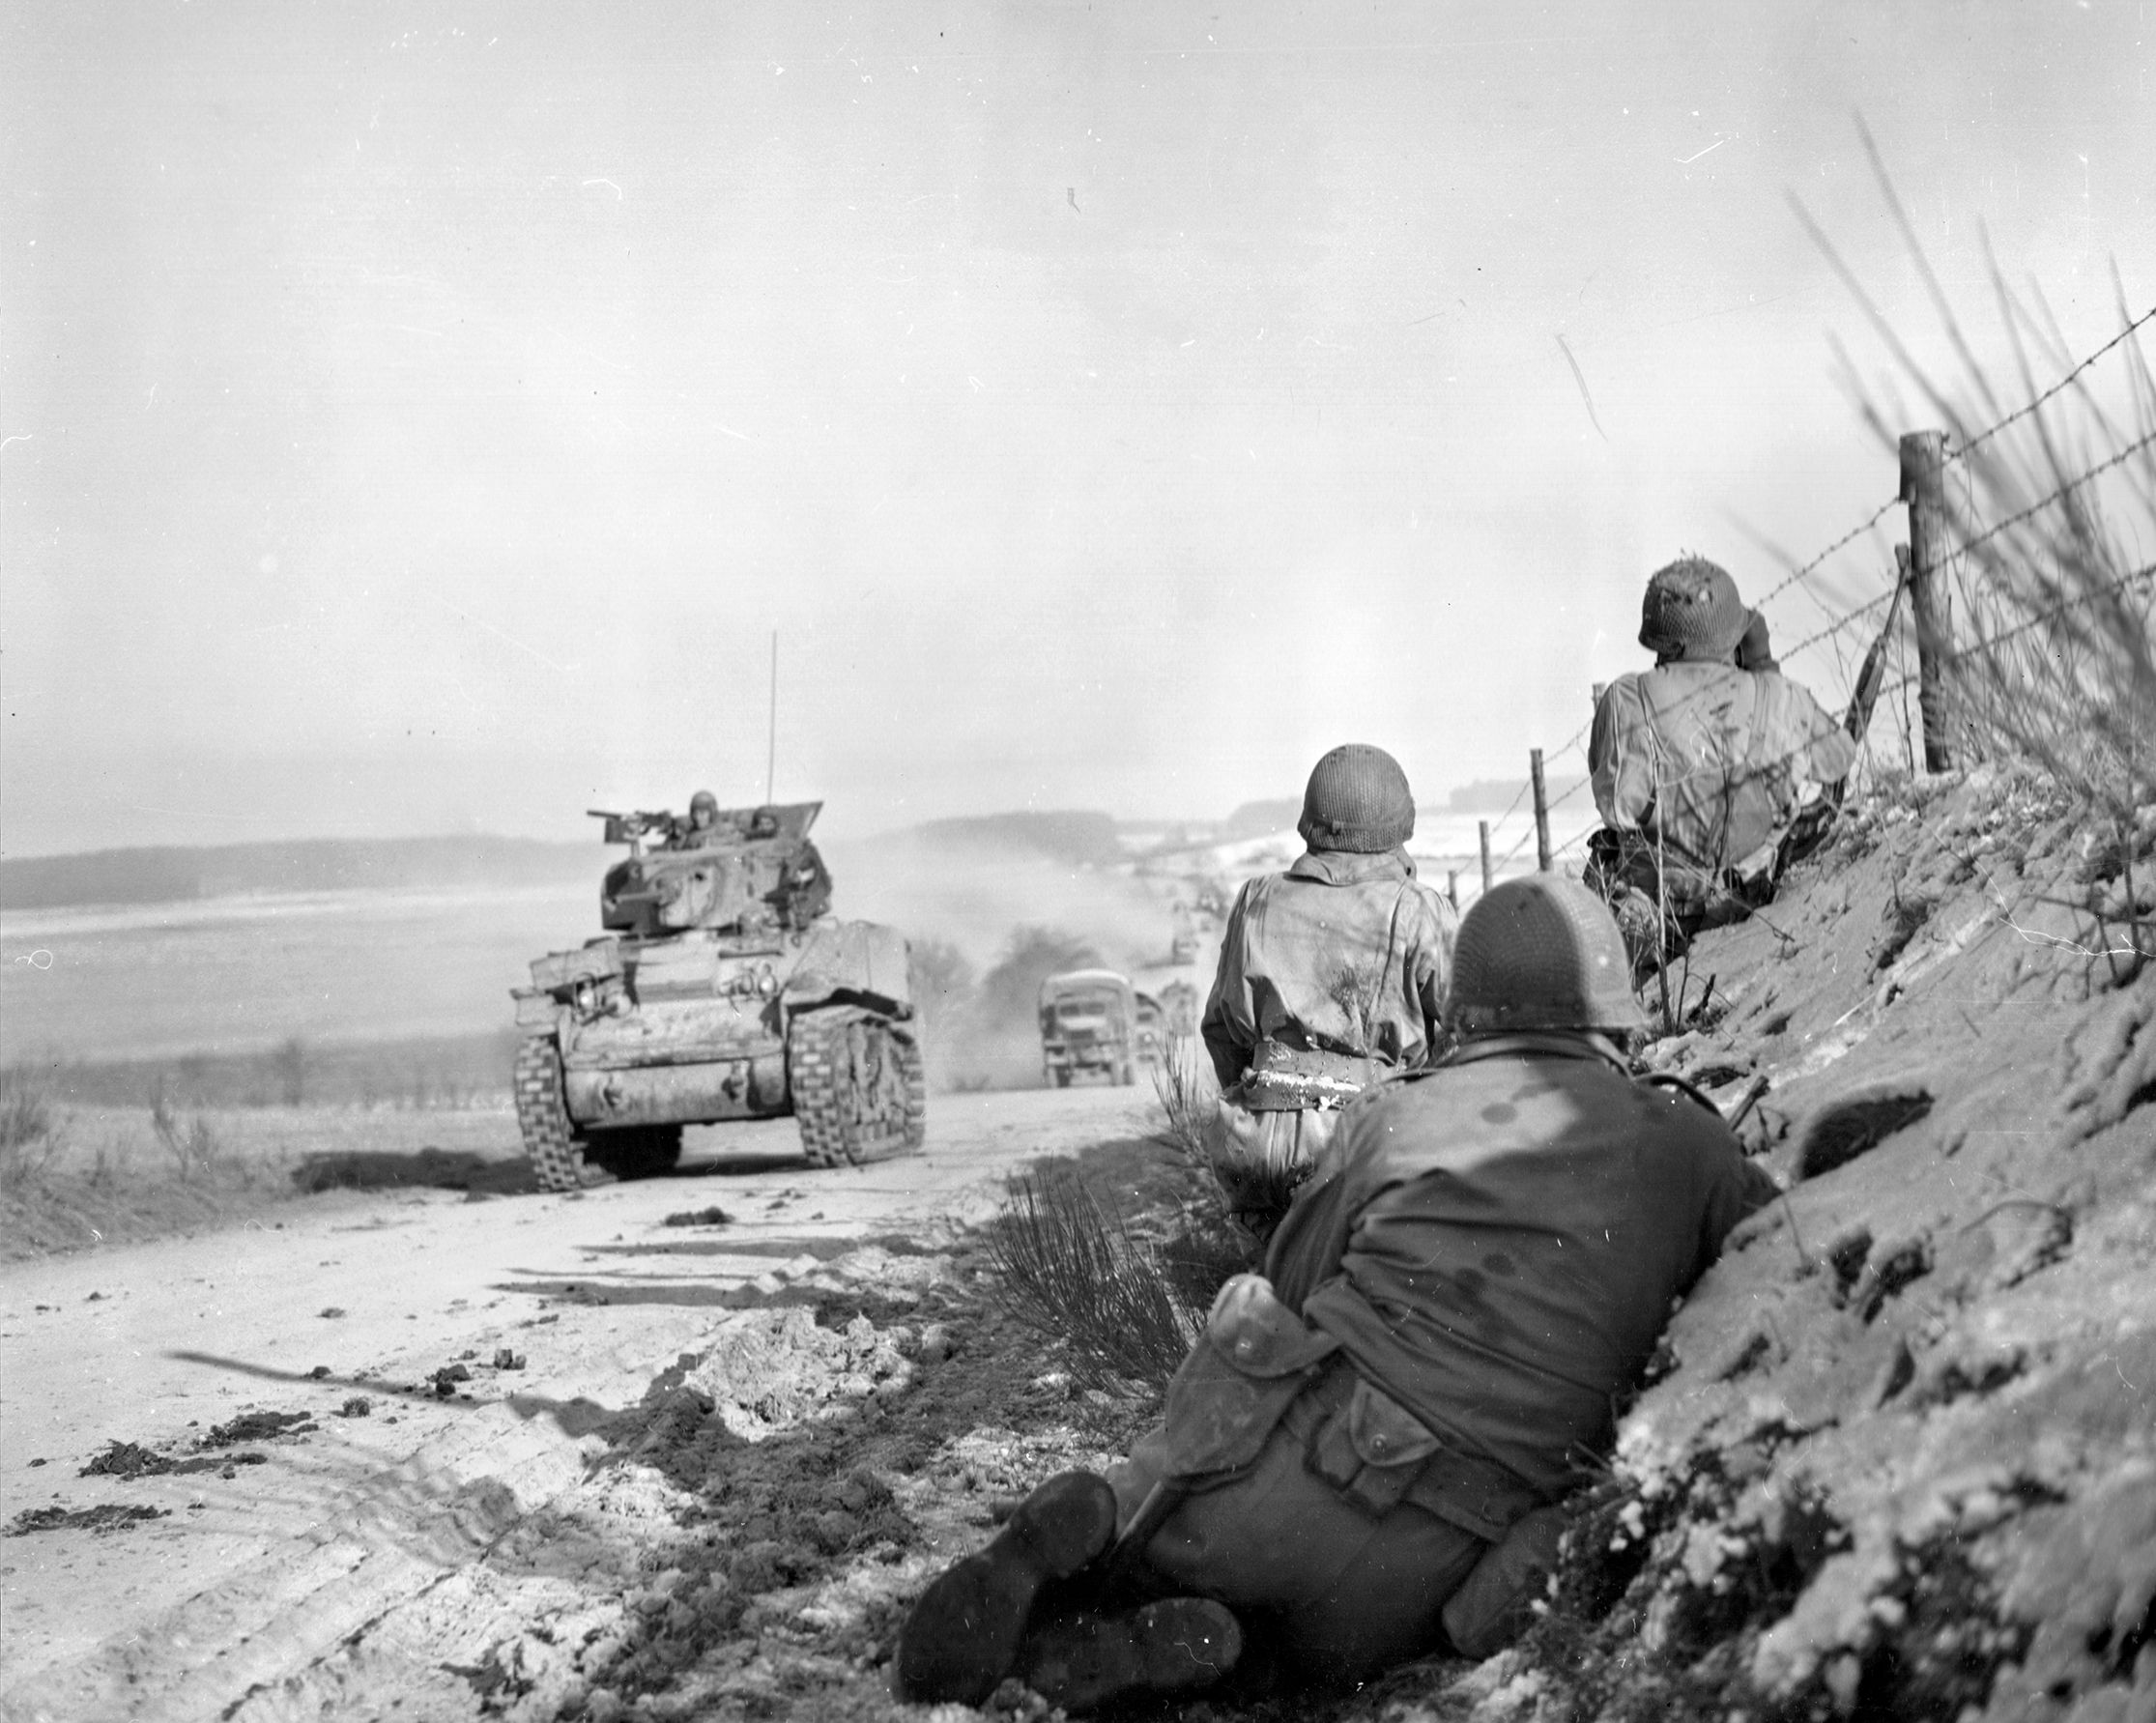 Working in mutual support, M4 Sherman medium tanks of the U.S. 4th Armored Division make their way toward Bastogne while American infantrymen guard their flanks and watch for signs of enemy activity during the Battle of the Bulge. 